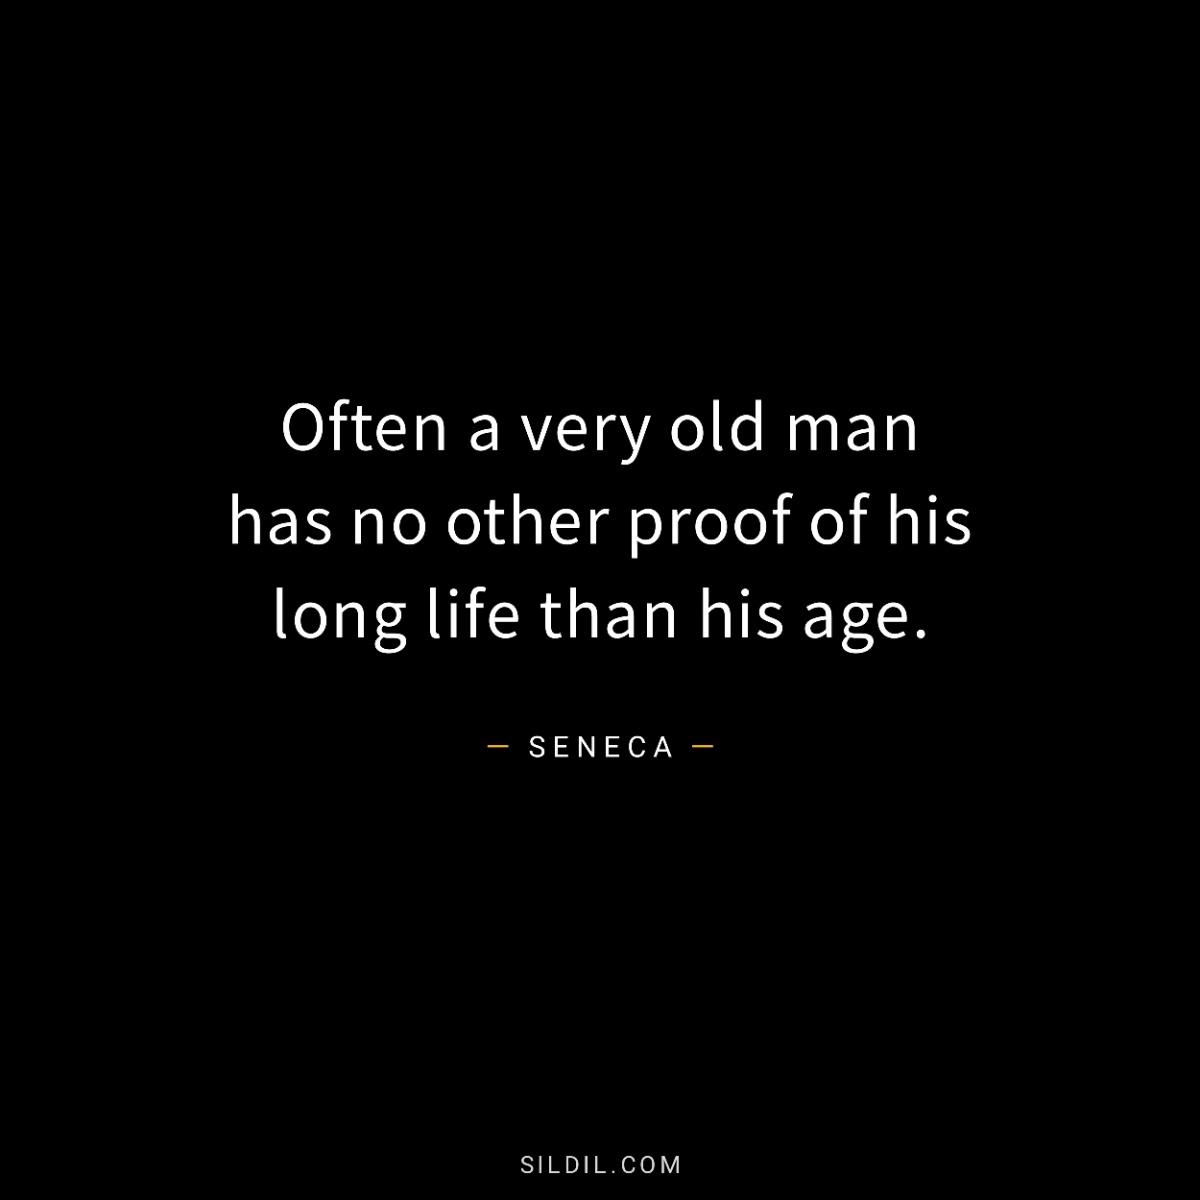 Often a very old man has no other proof of his long life than his age.